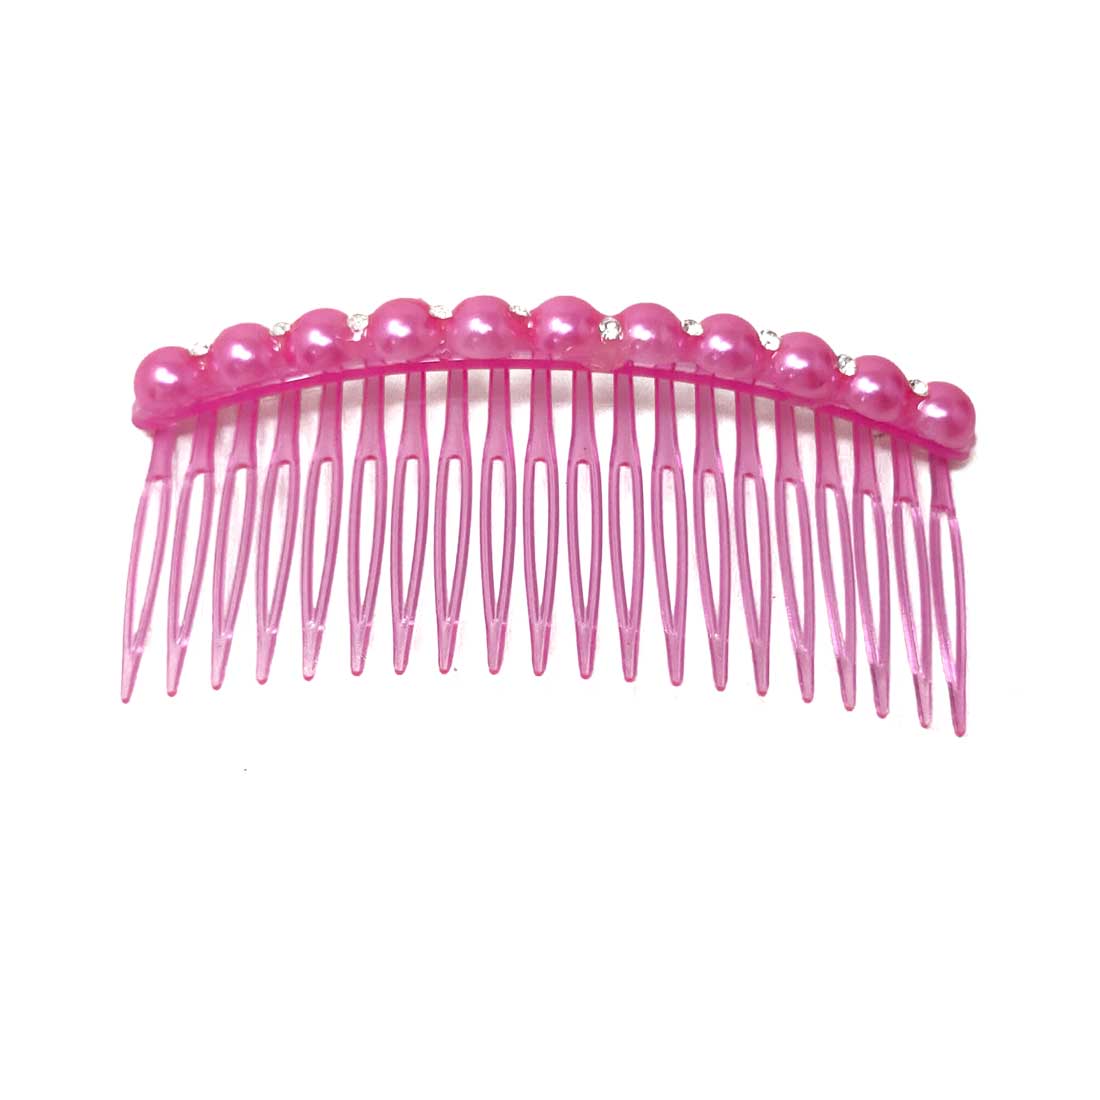 Anokhi Ada Hair Comb Clip for Women and Girls, Pink (07-01)